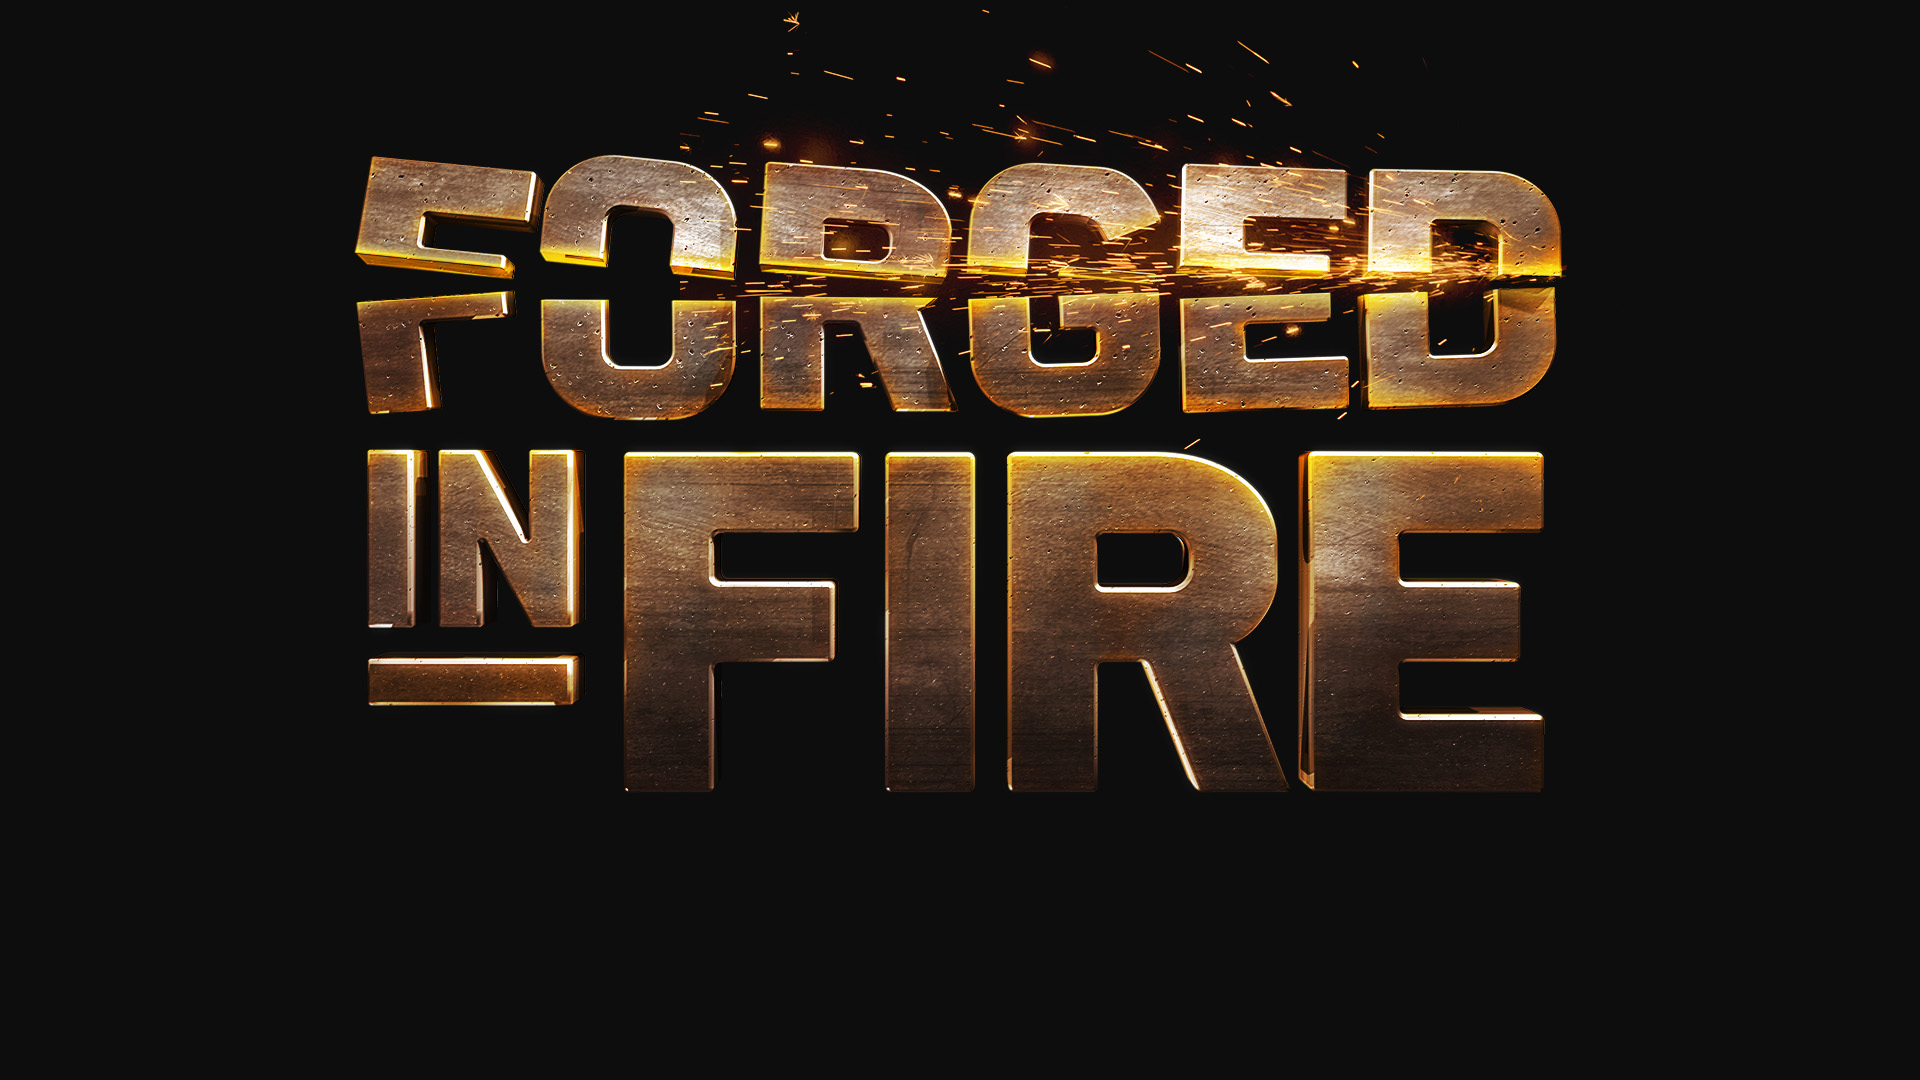 forged in fire cutting deeper